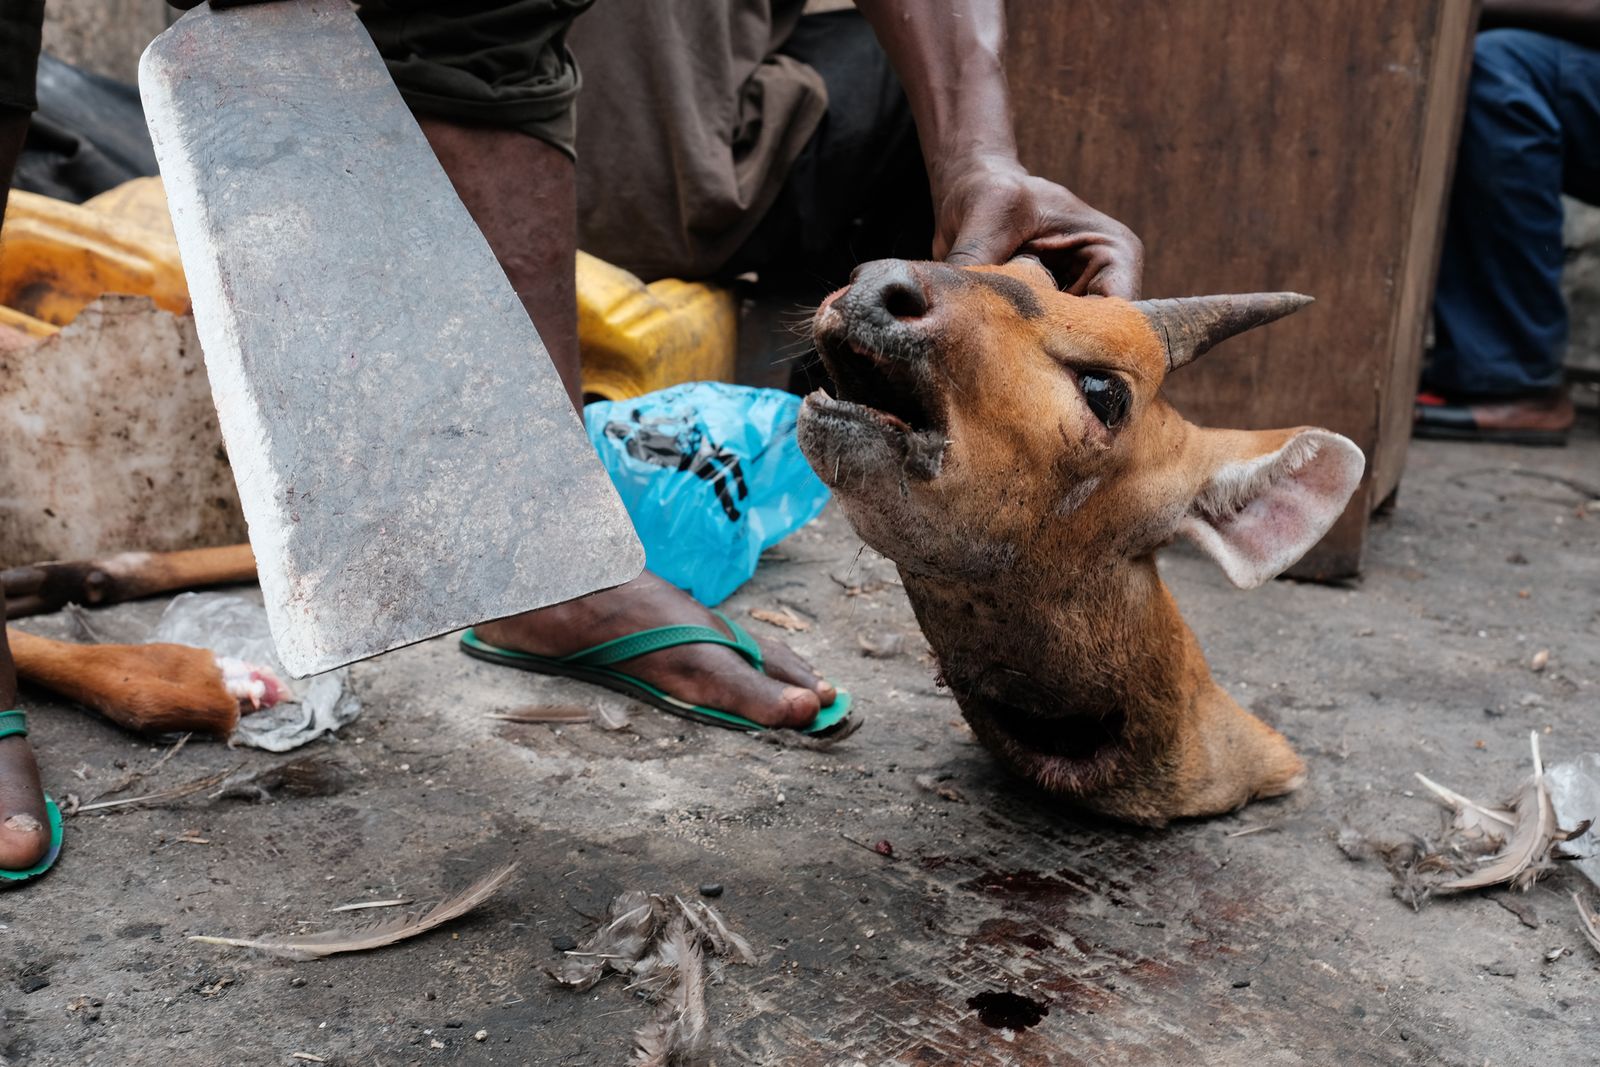 © Nyani Quarmyne - Image from the The Price of Bushmeat photography project